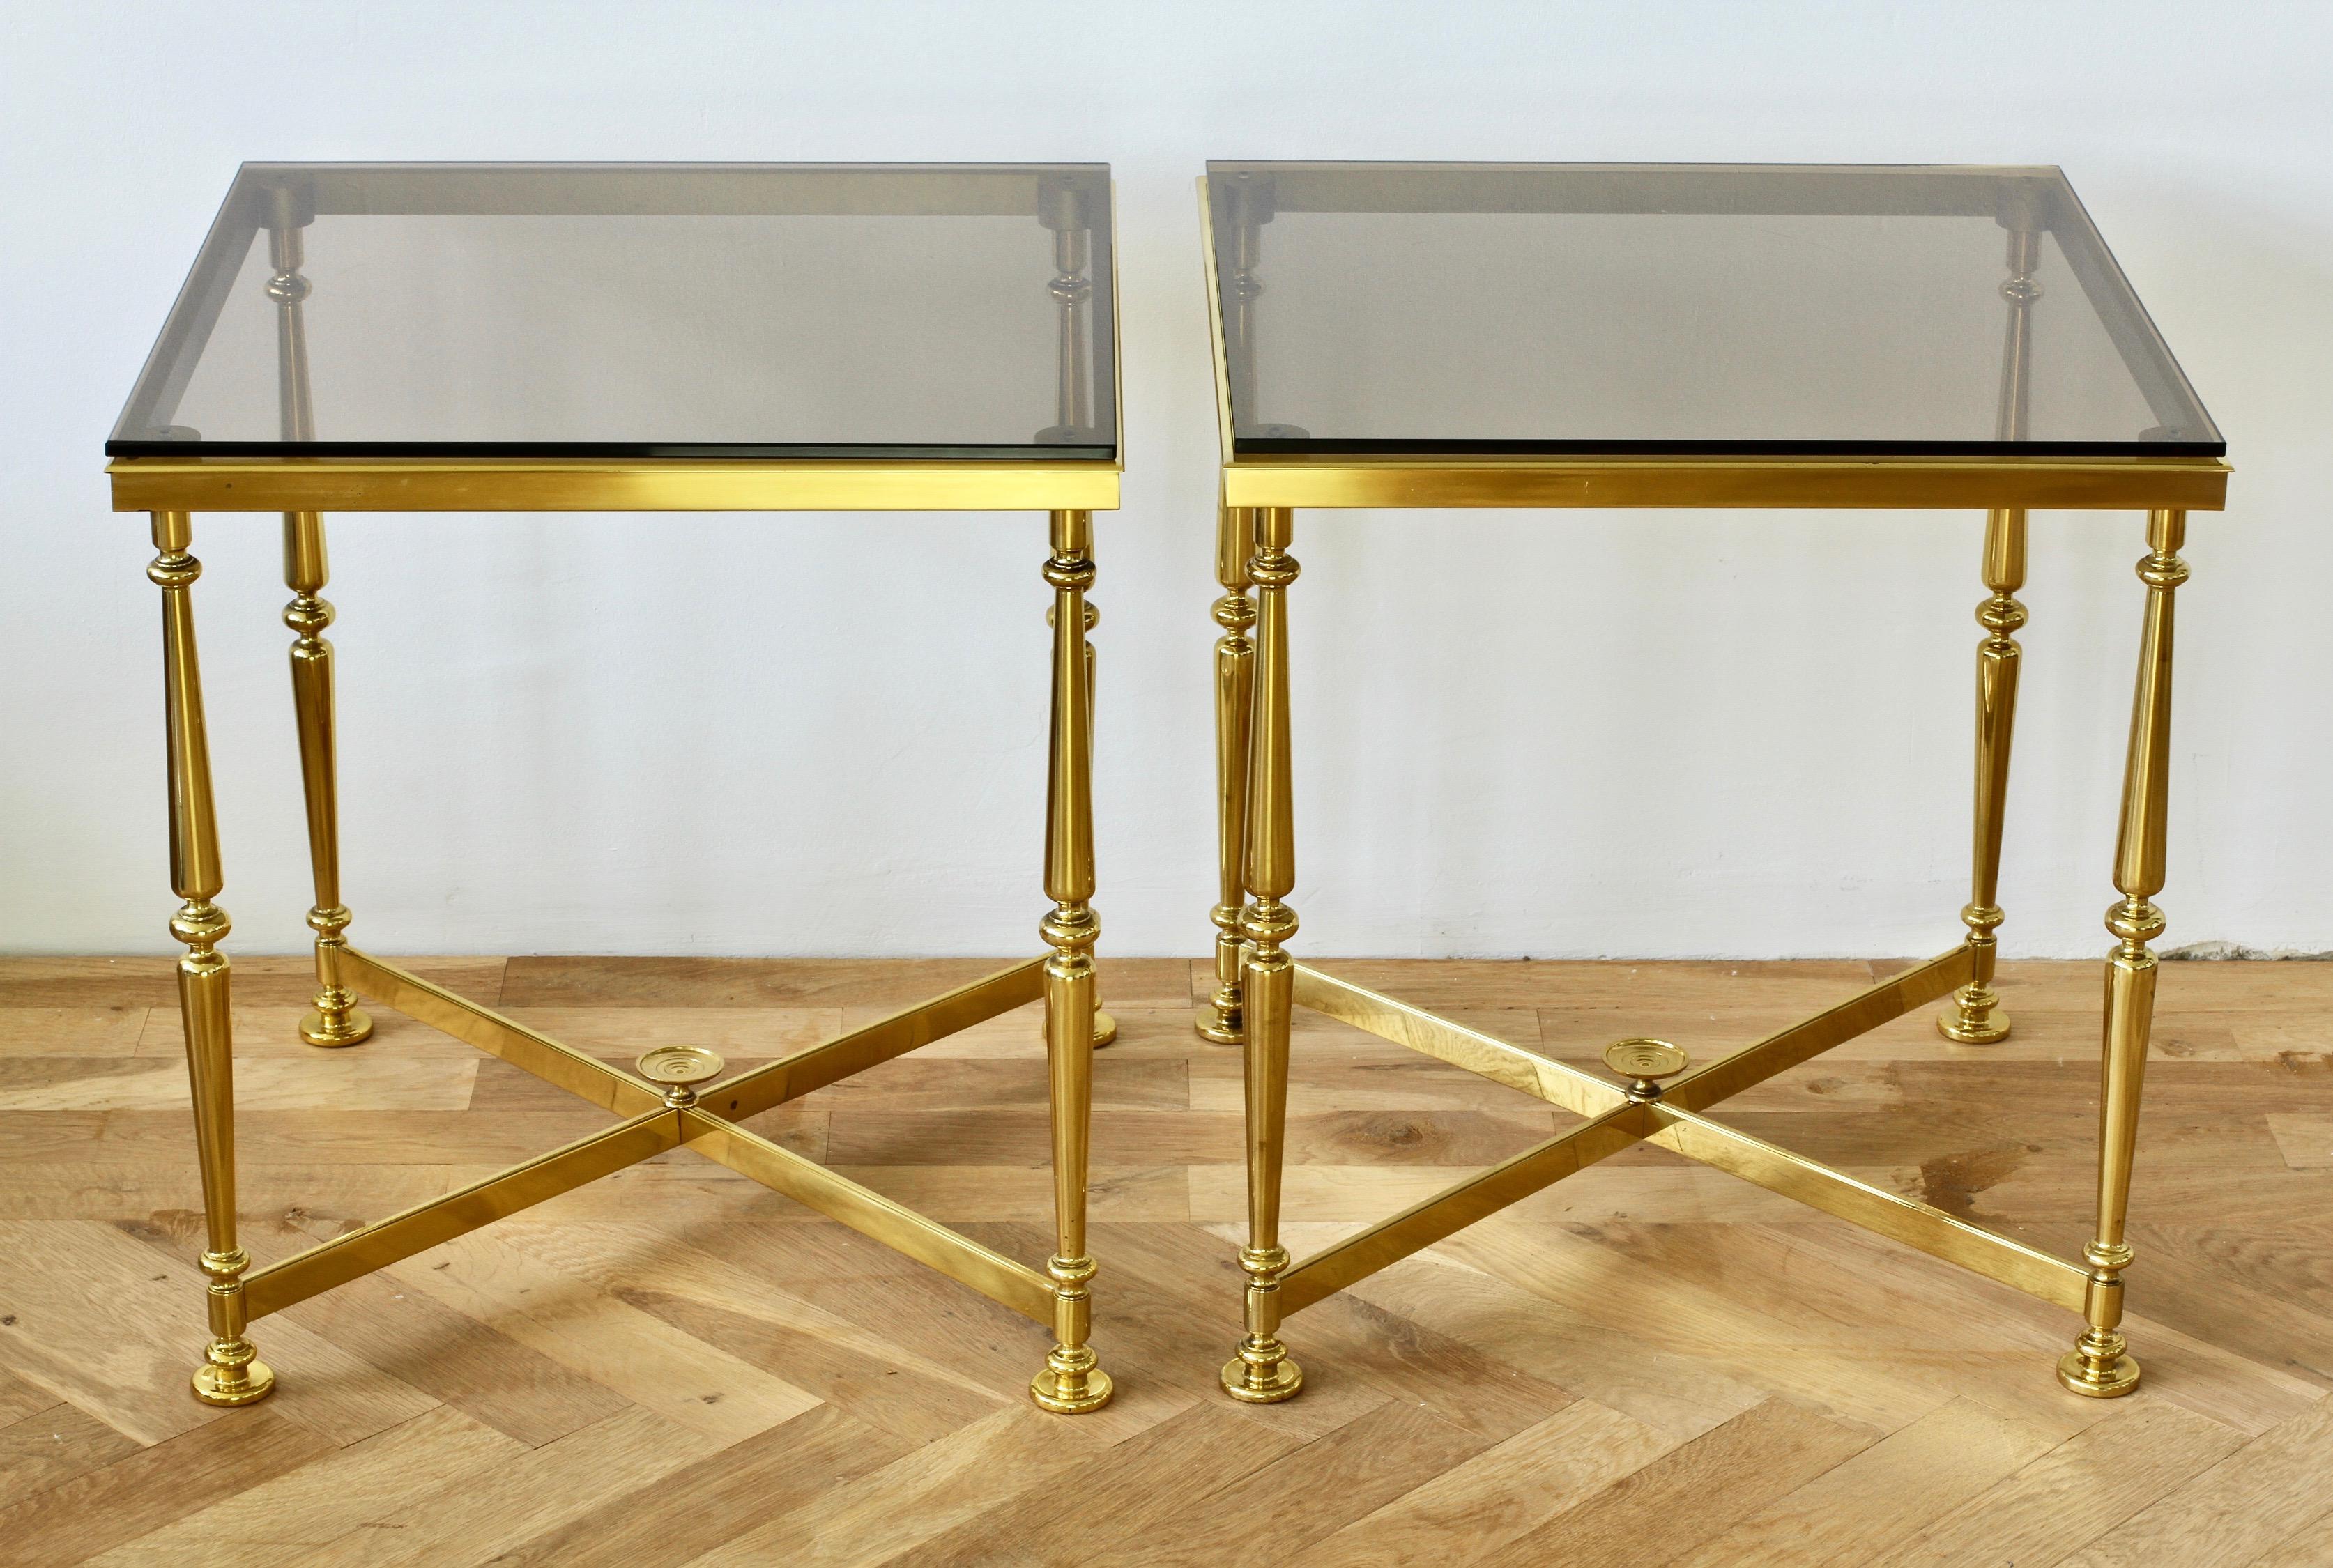 Wonderful pair of side or end tables (glass table tops not included) in the style of Maison Jansen, made by the Vereinigte Werkstätten circa 1970. Made from solid cast brass in the modern neoclassical style and crossed X-base. These delightful